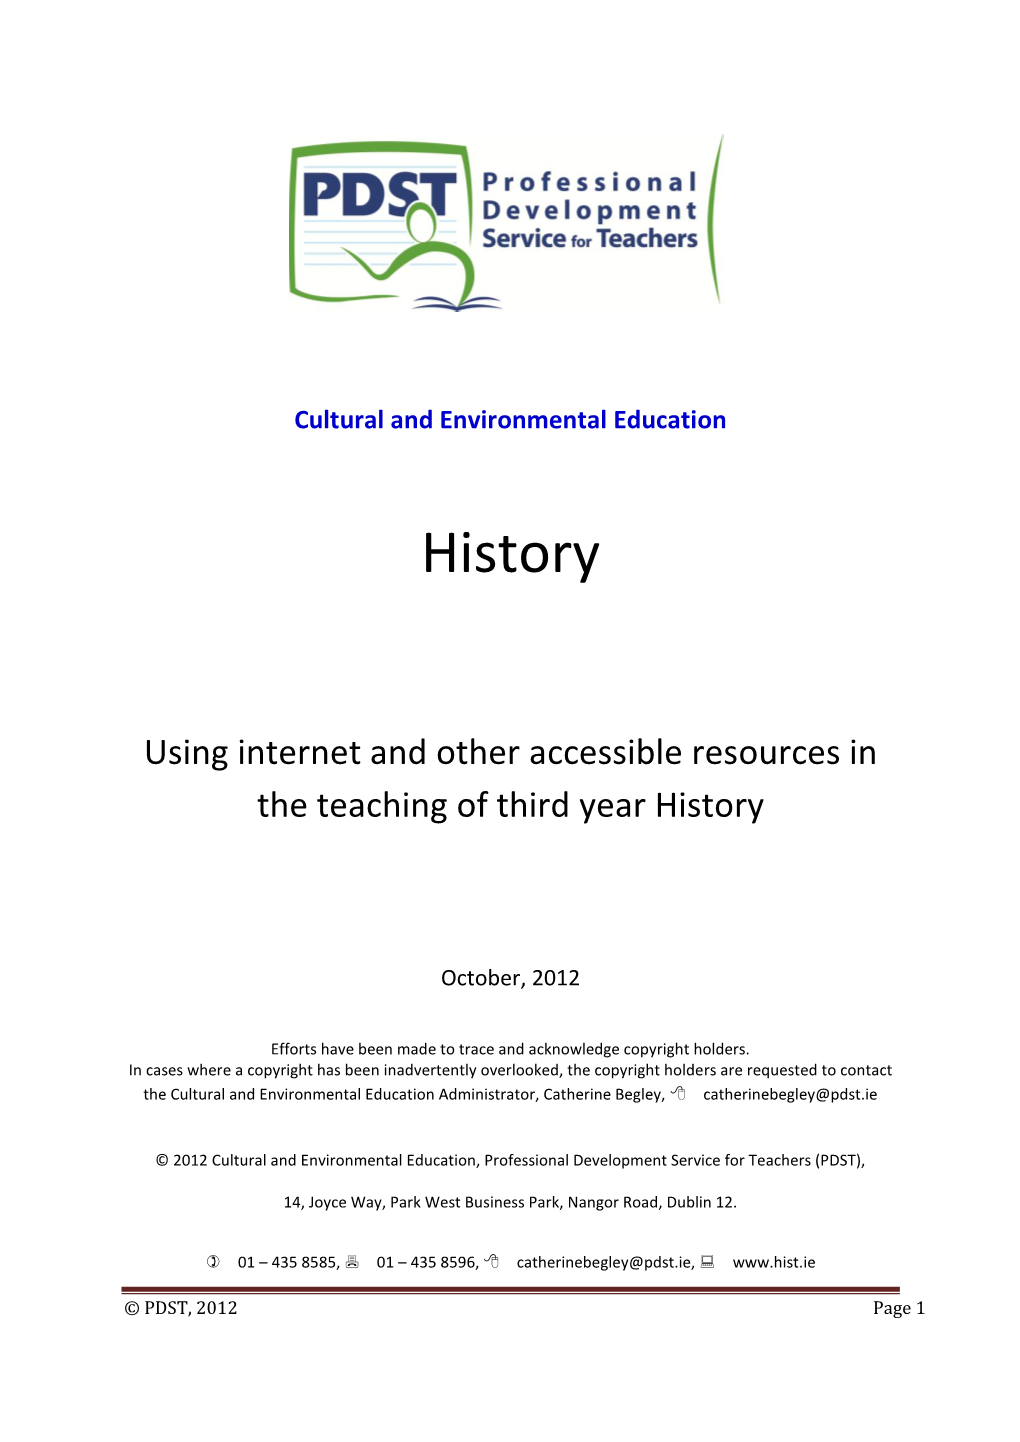 Using Internet and Other Accessible Resources in the Teaching of Third Year History